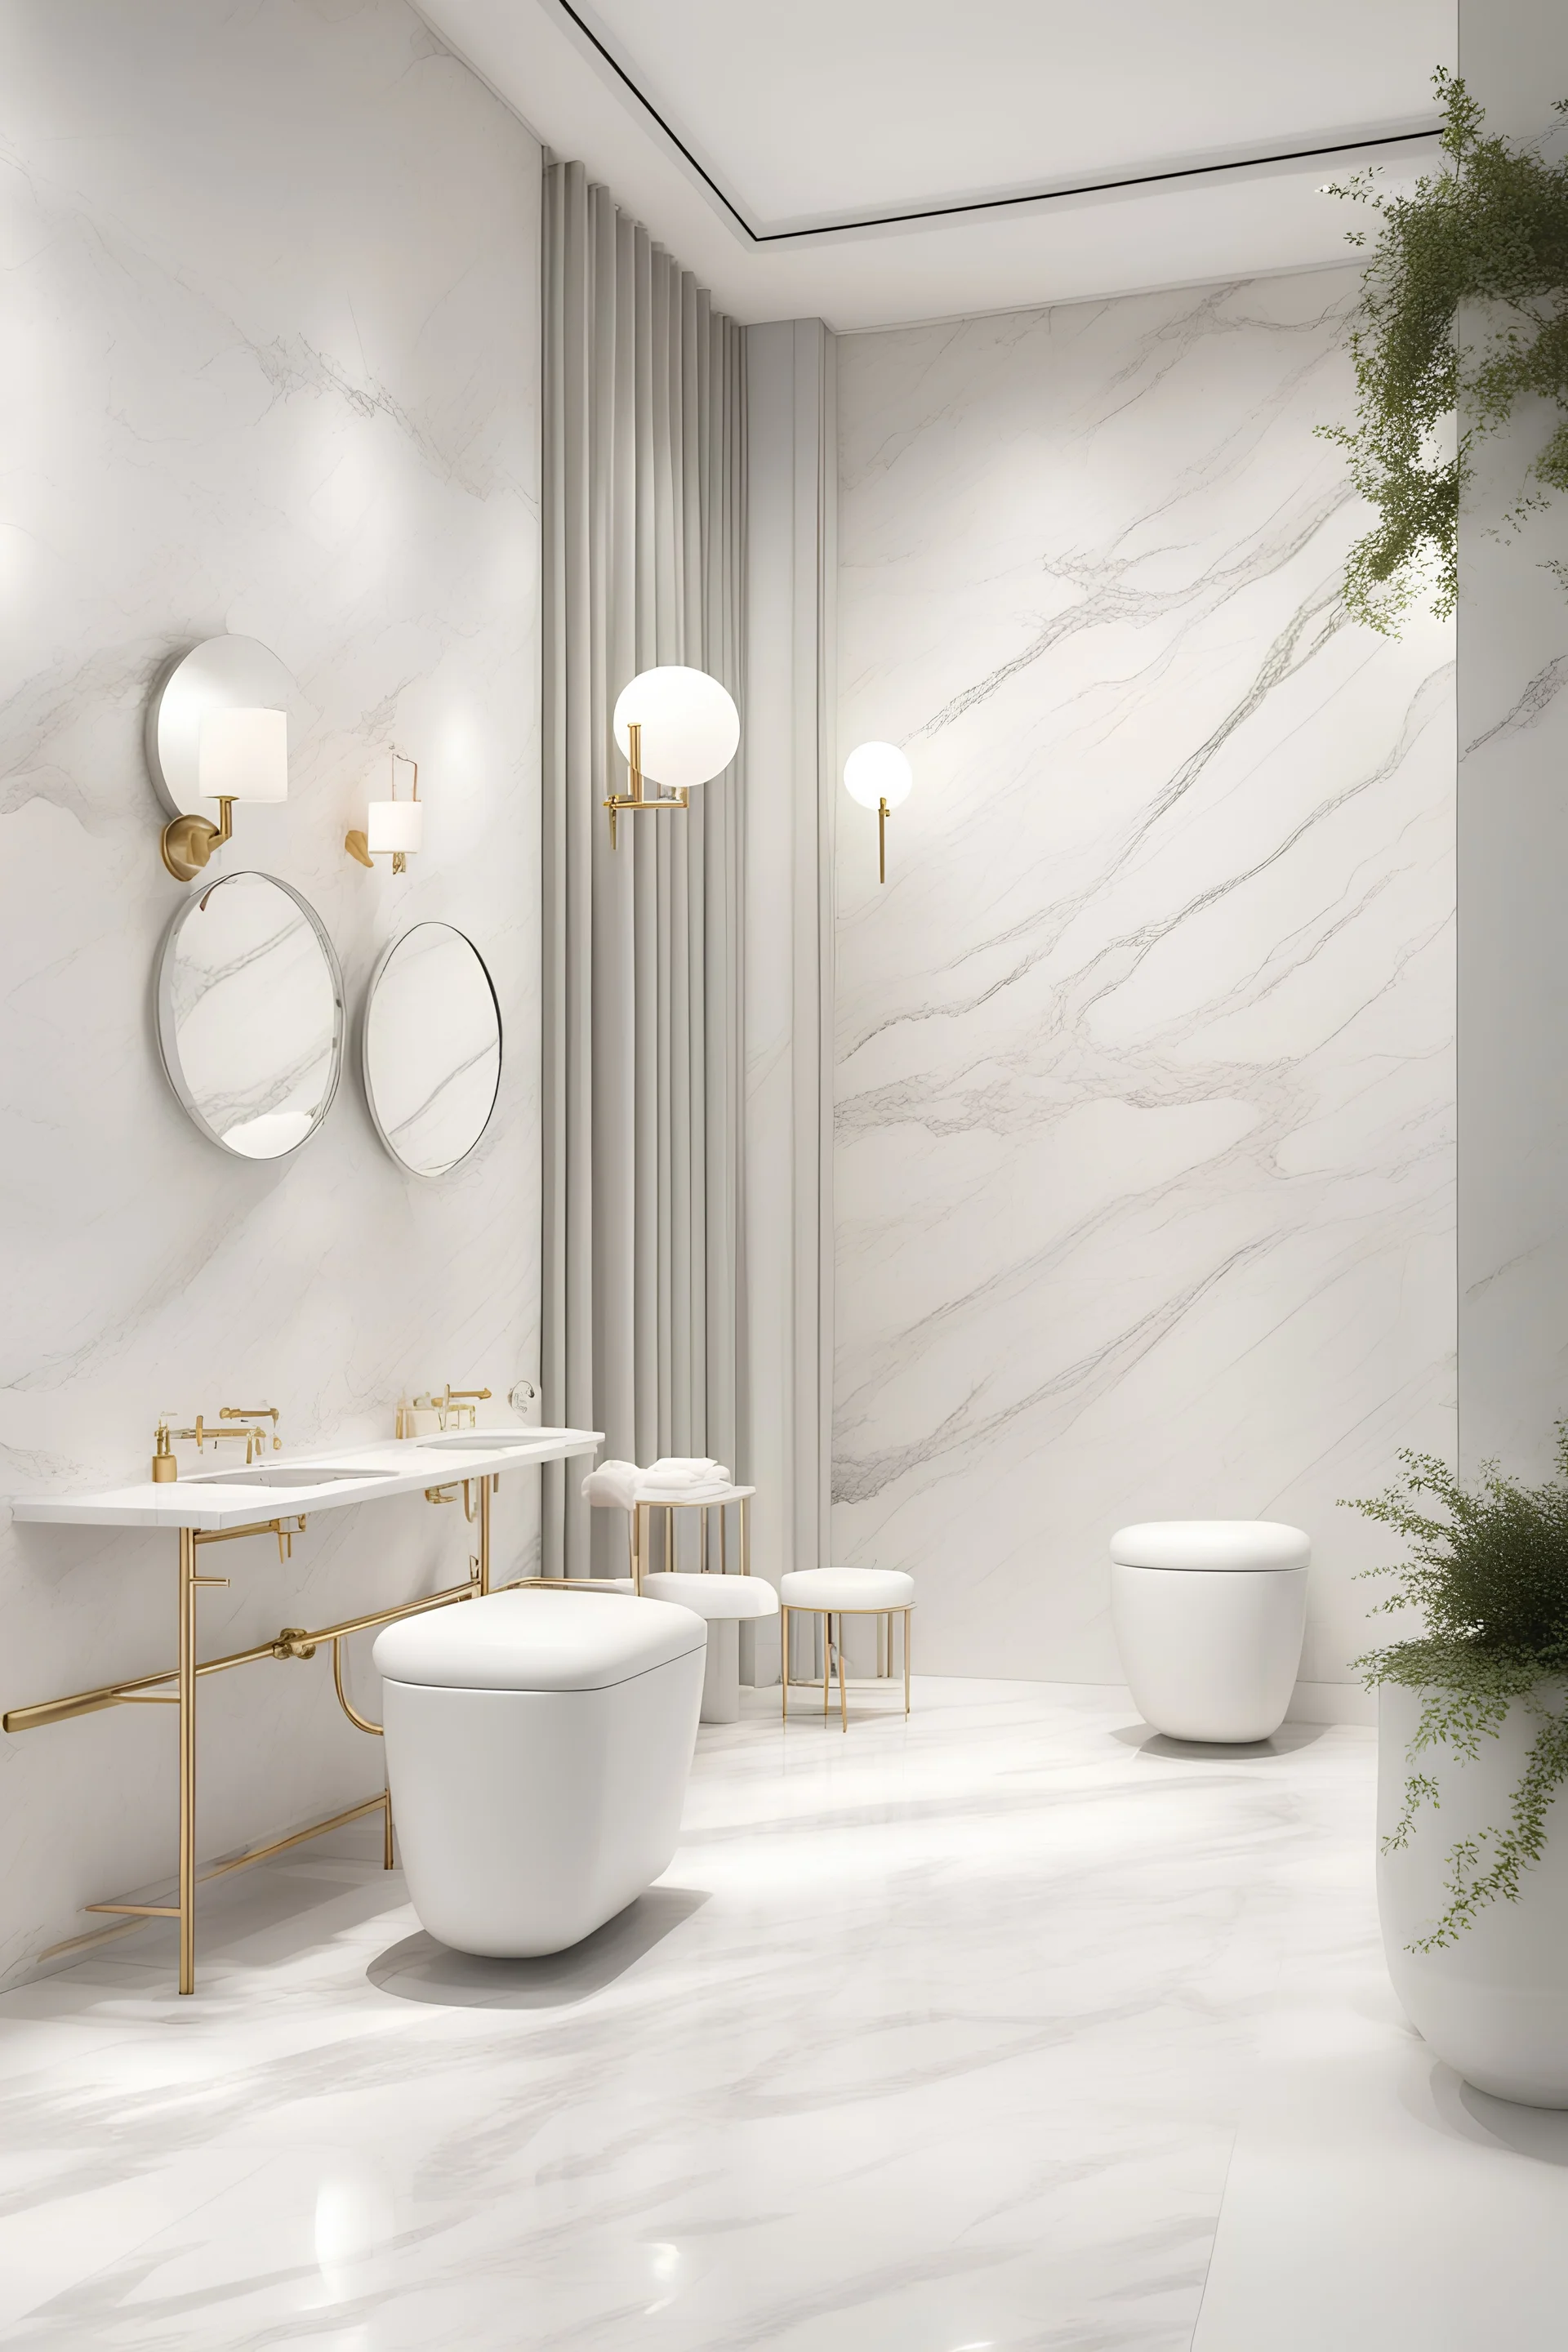 Create a rendering of a bathroom inside a cafeteria all in white marble finishes.